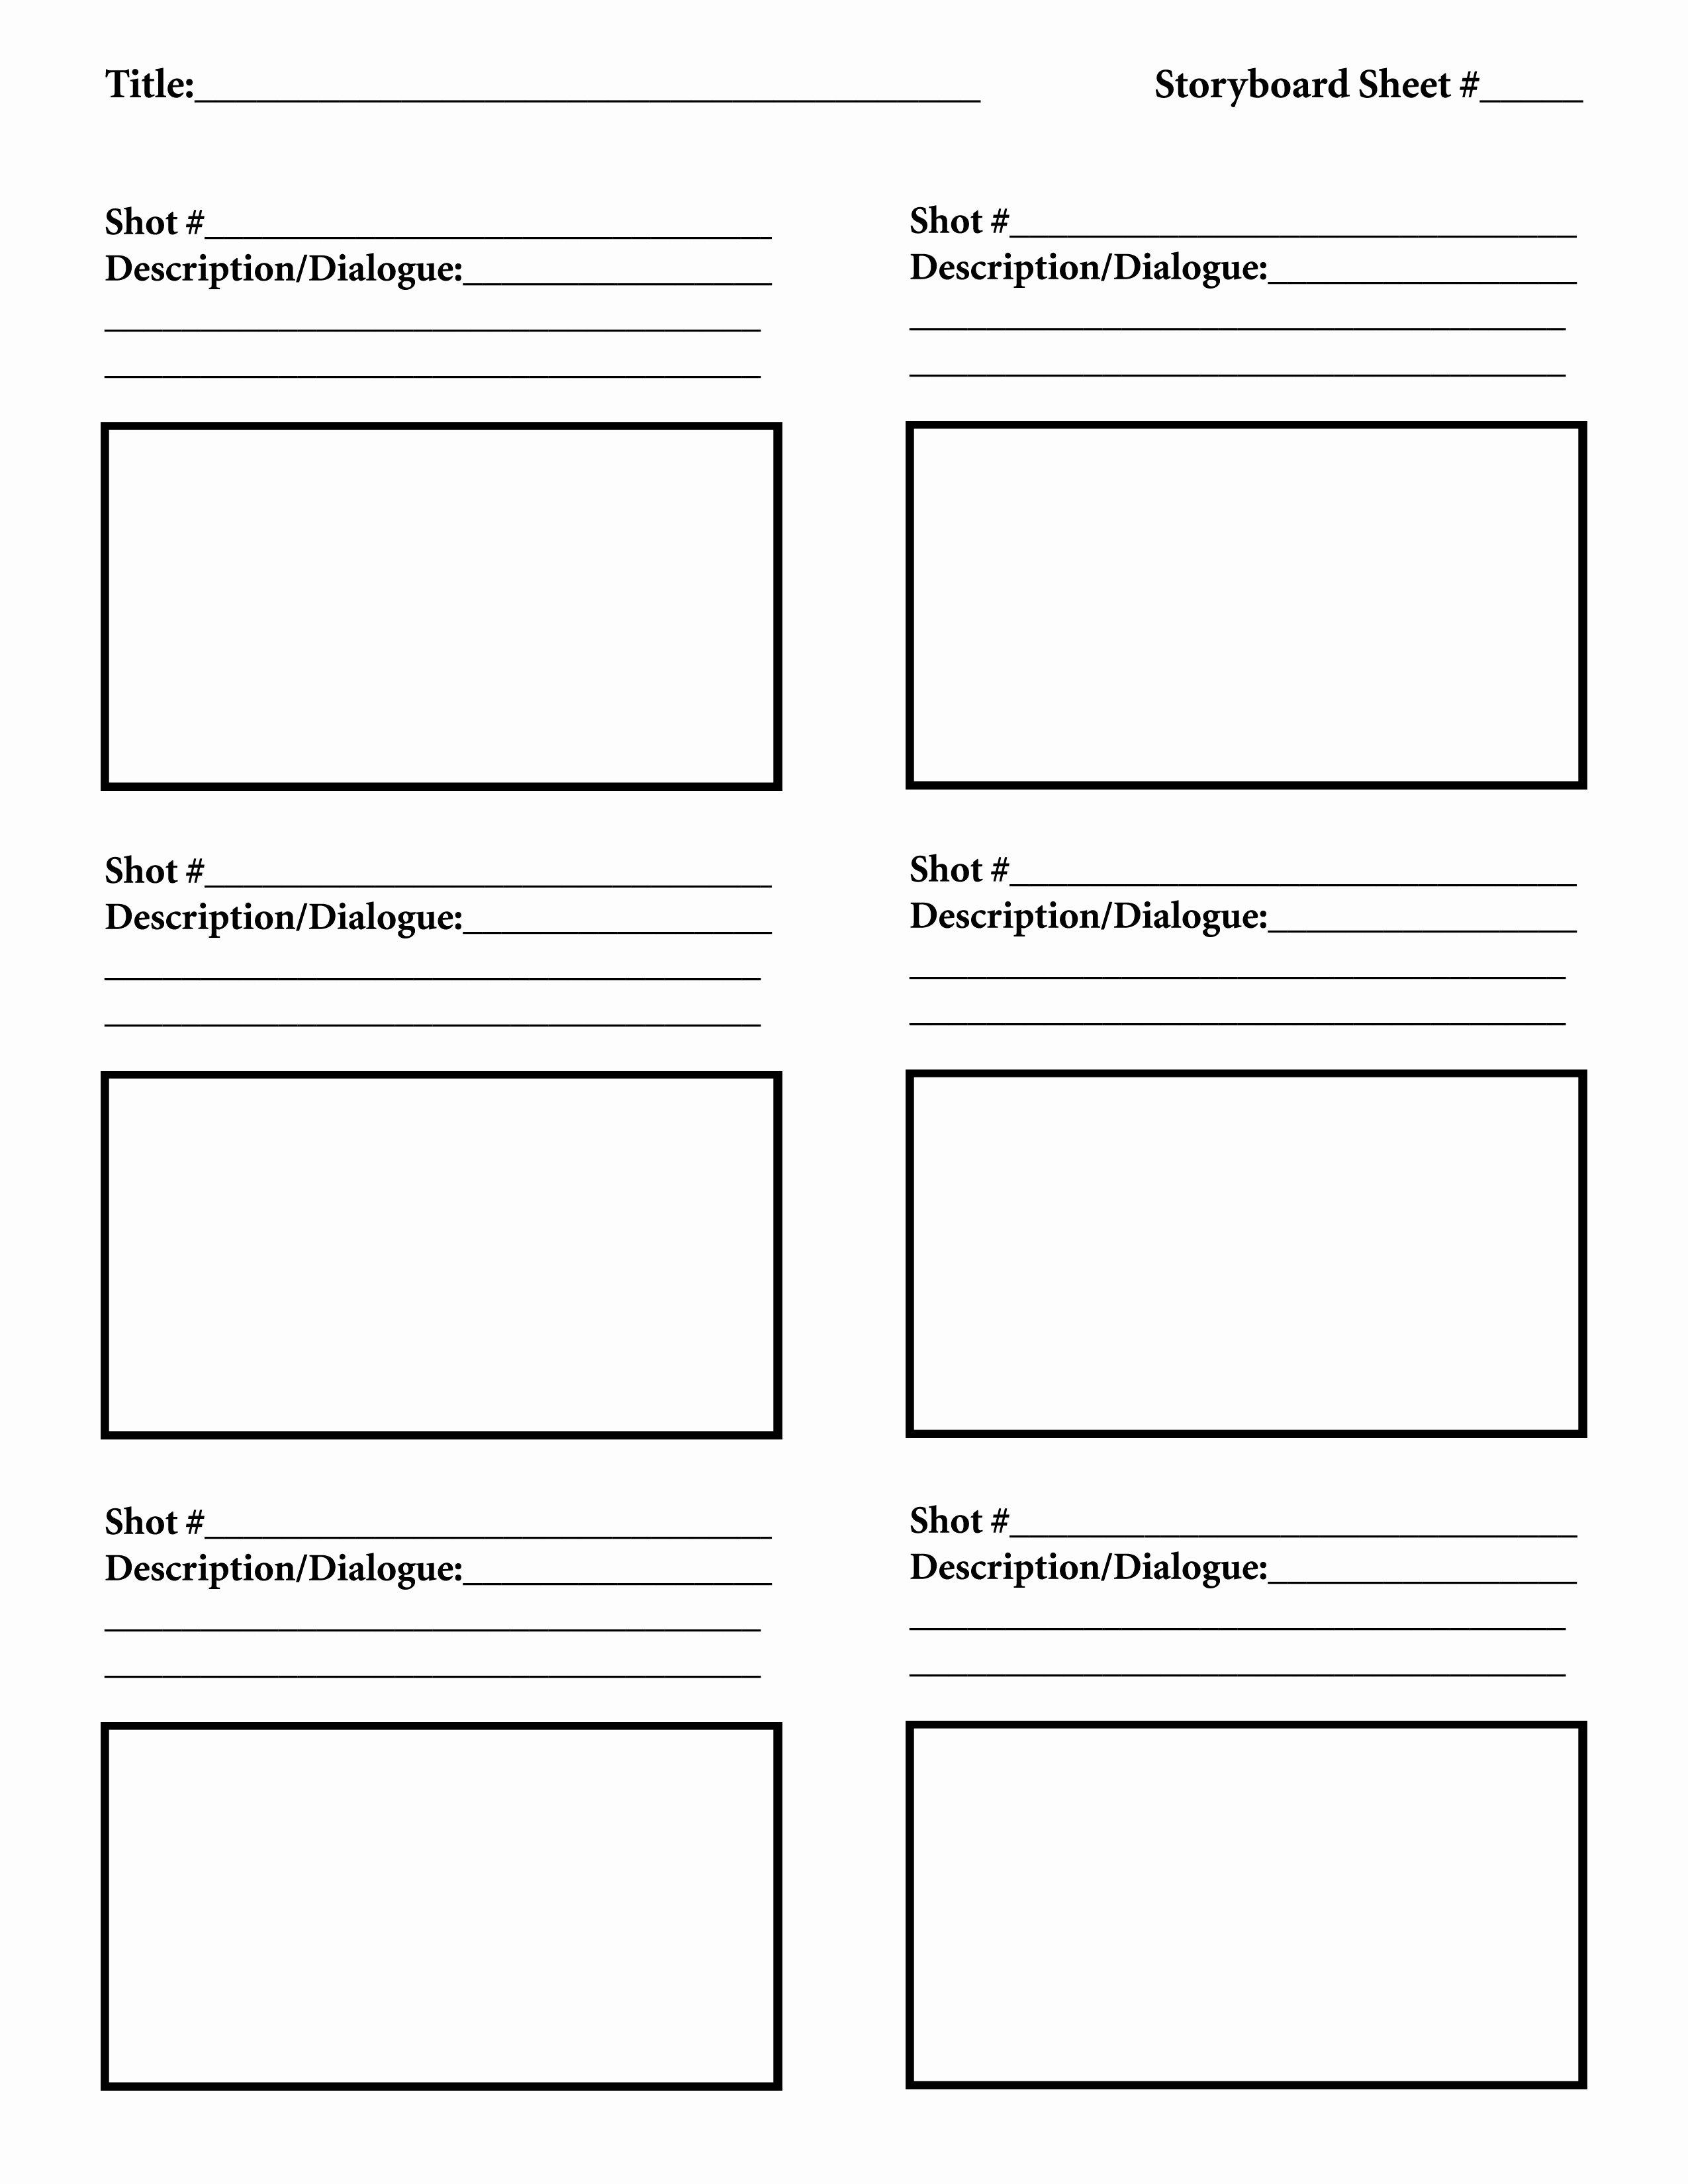 Professional Film Storyboard Template Unique Download Free Storyboard Template Tutorials In